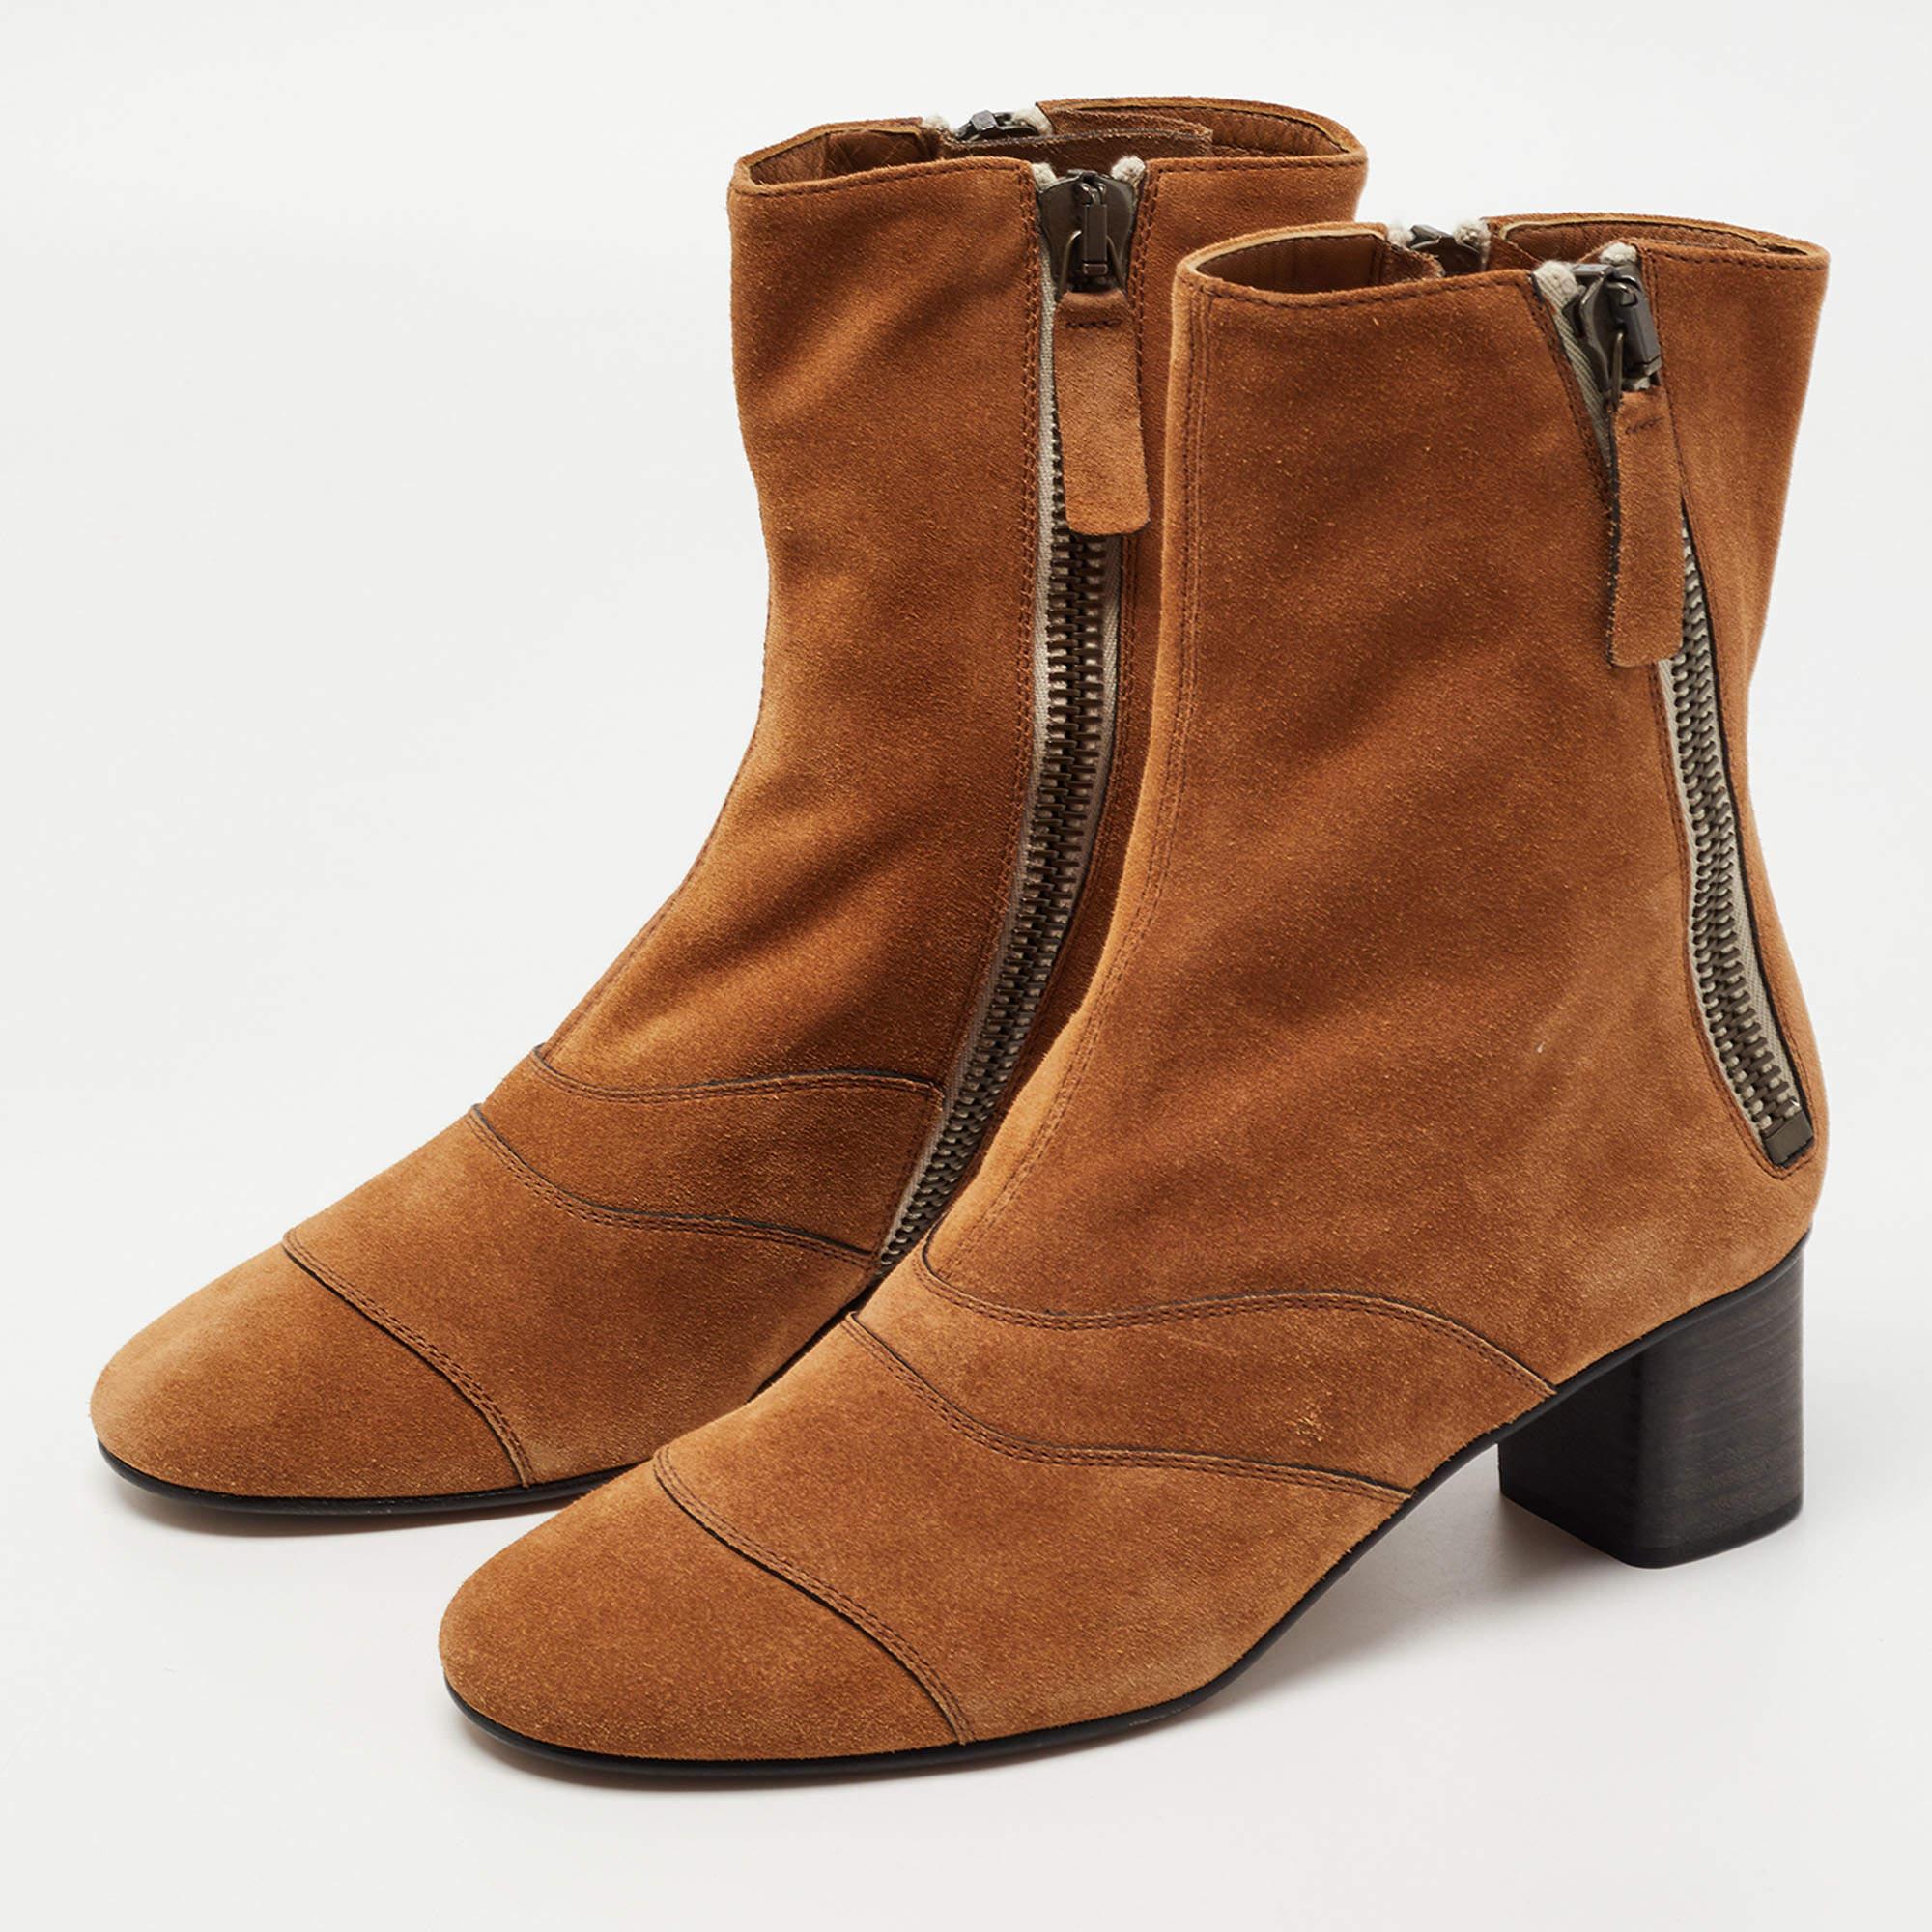 Women's Chloe Brown Suede Zip Ankle Boots Size 37.5